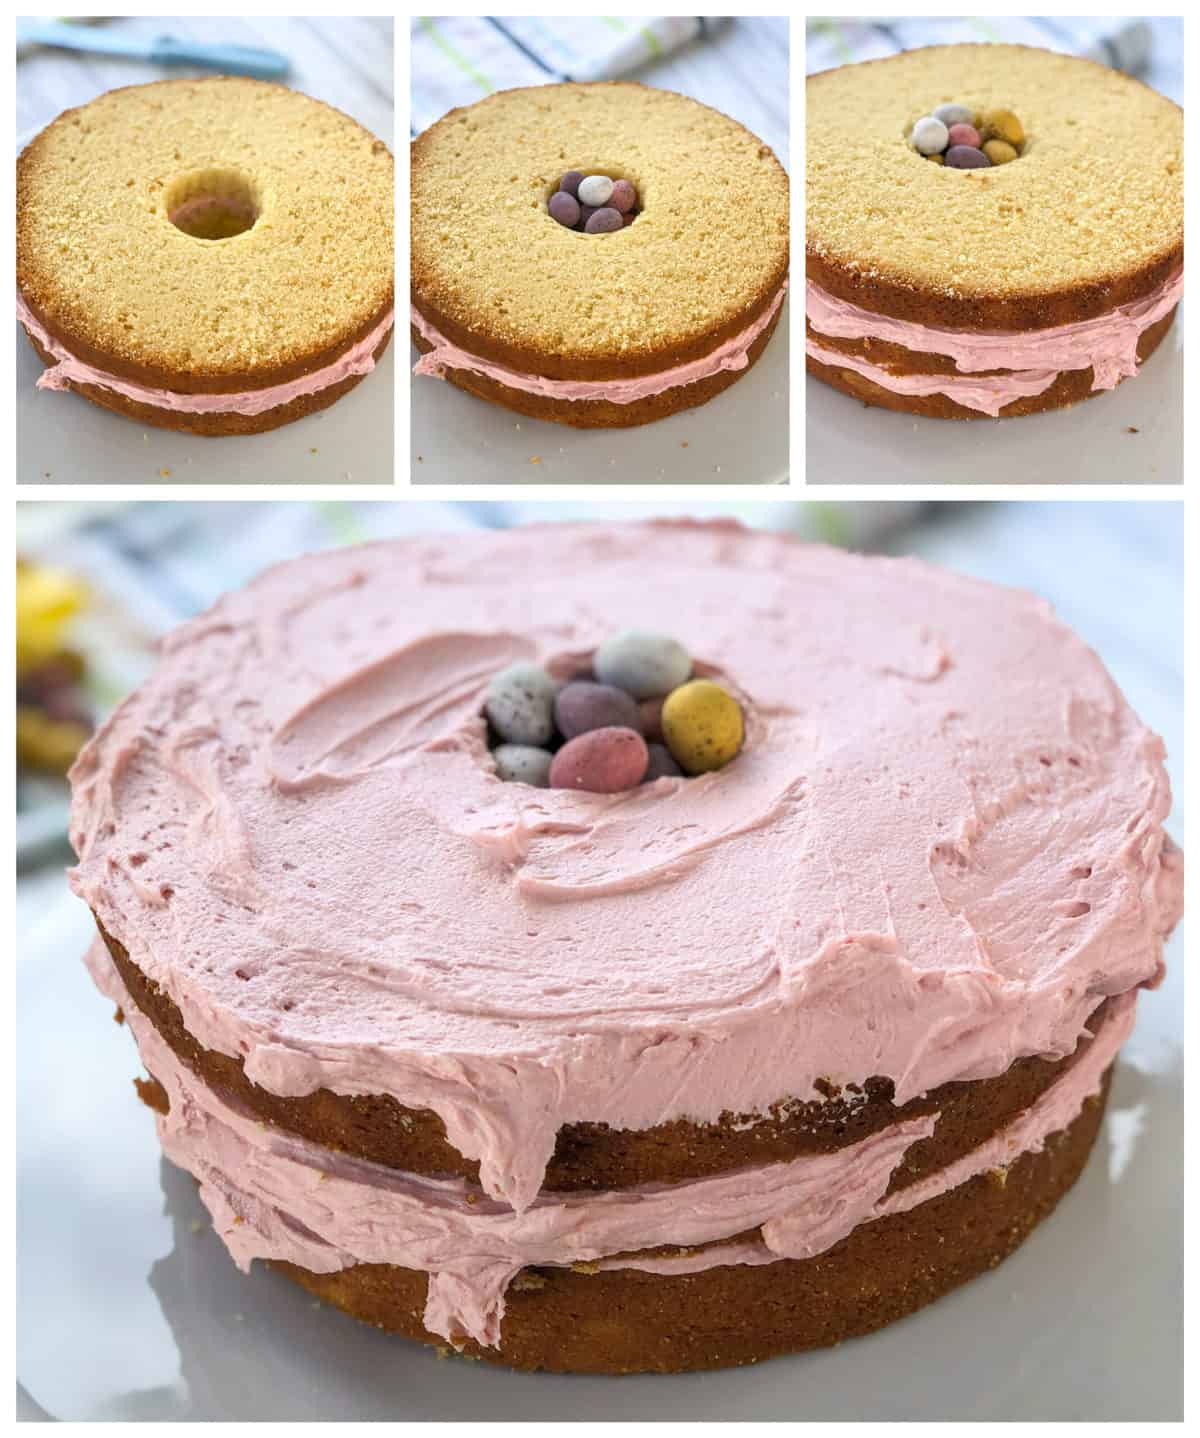 How to assemble the easter cake with the surprise inside and buttercream layers